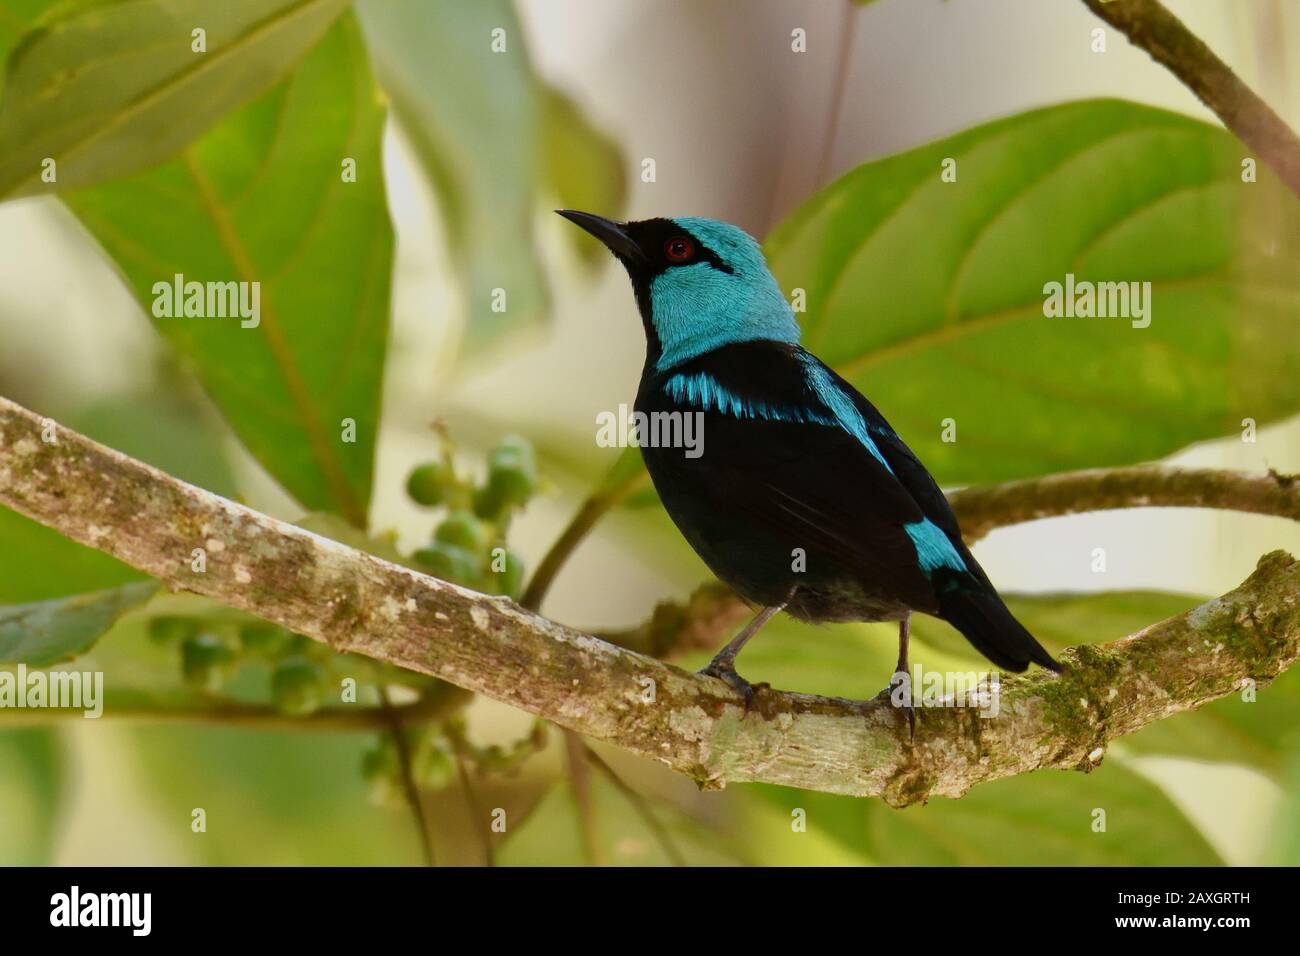 A Scarlet-thighed Dacnis in Costa Rica rainforest Stock Photo